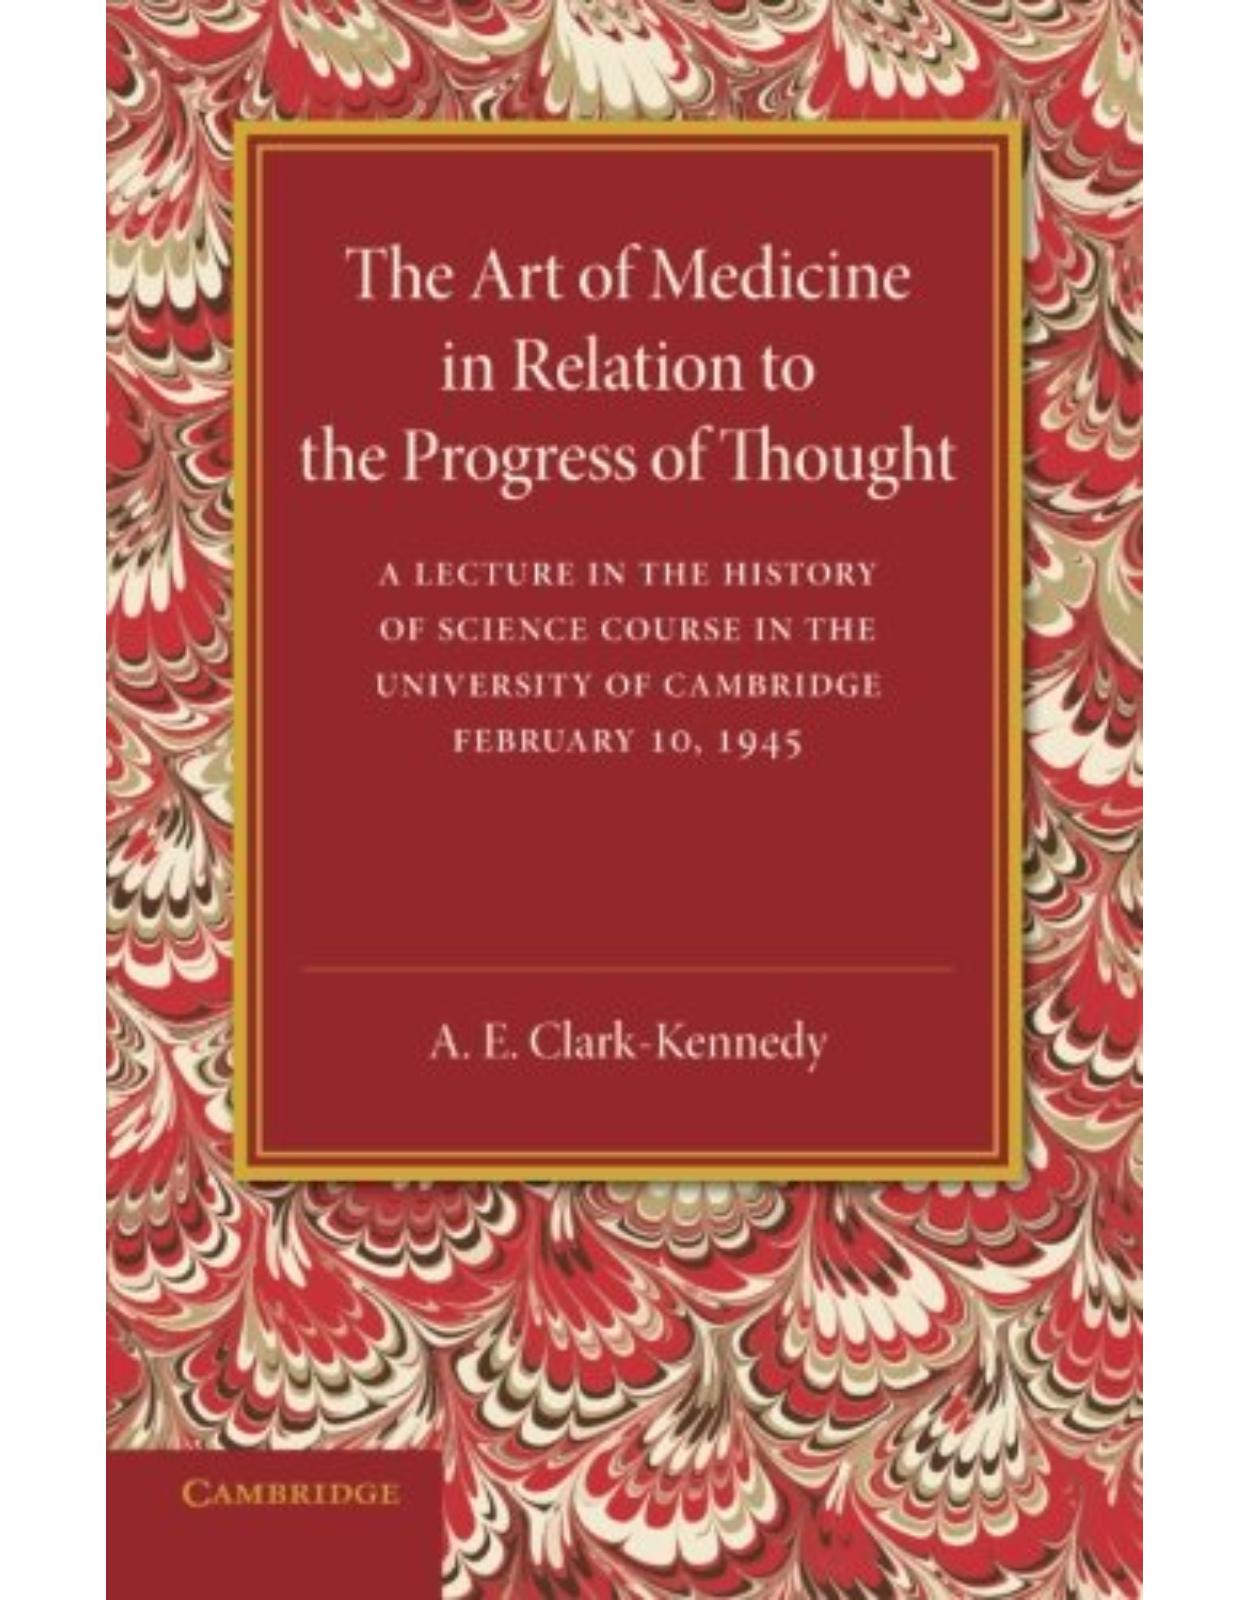 The Art of Medicine in Relation to the Progress of Thought